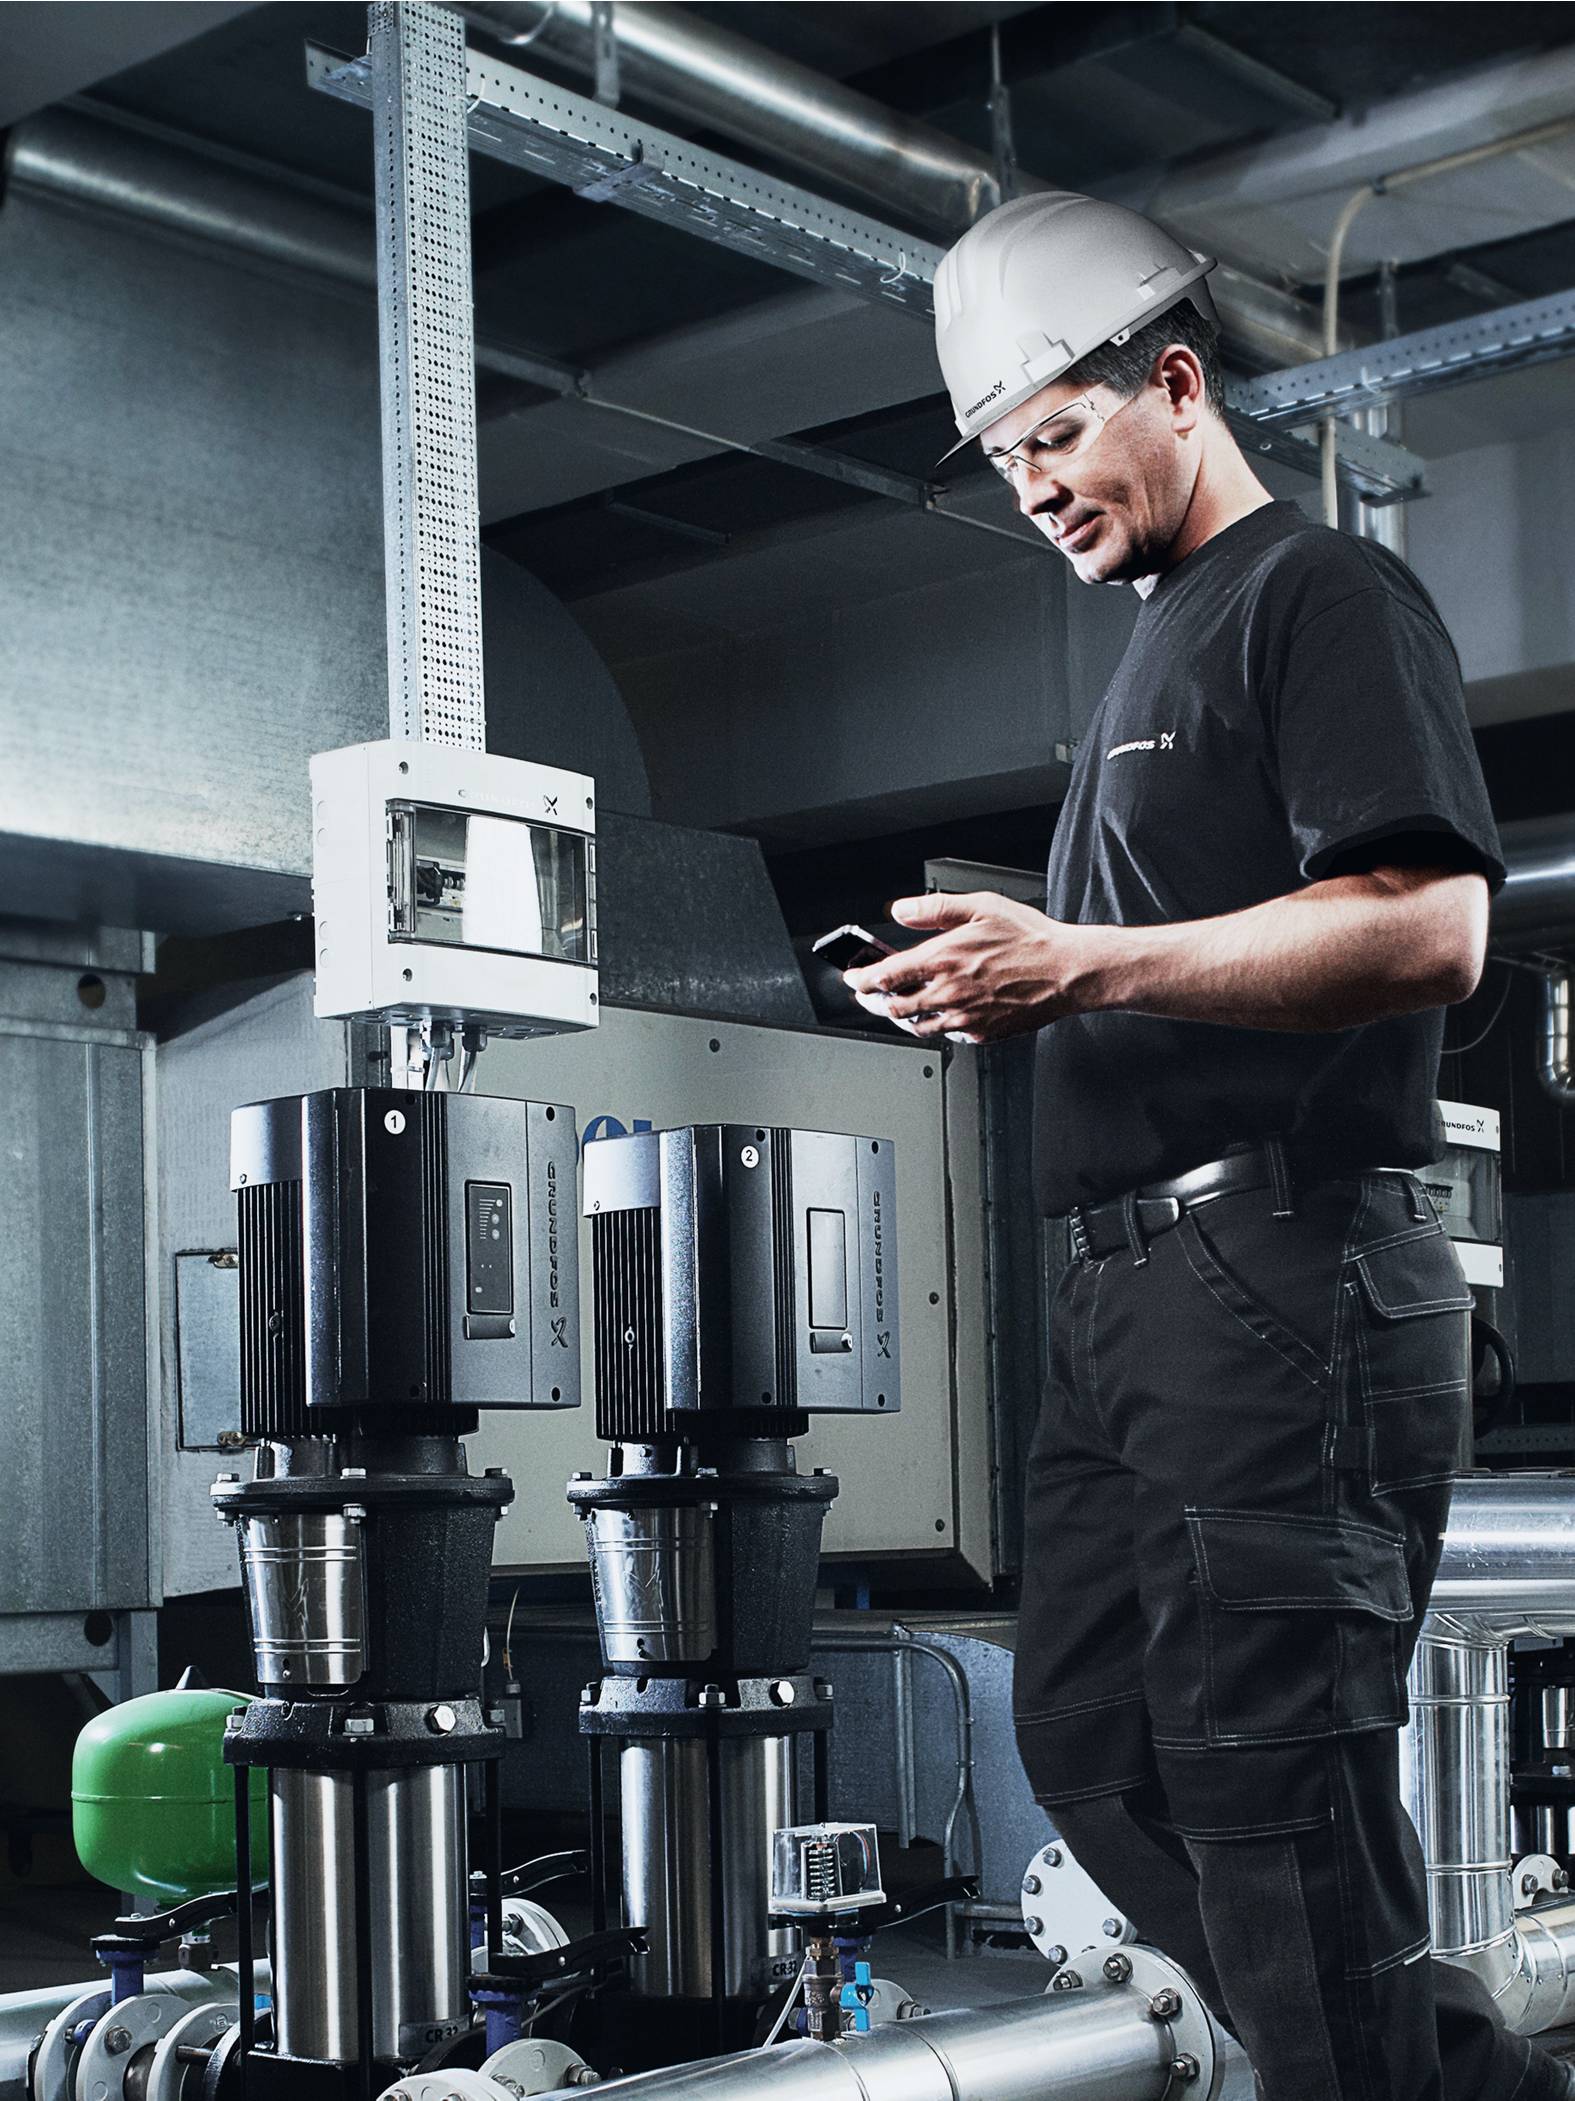 English (USA) | The full range supplier of pumps and pump solutions. As a renowned pump manufacturer, Grundfos delivers efficient, reliable, and sustainable solutions all over the globe. into our world.